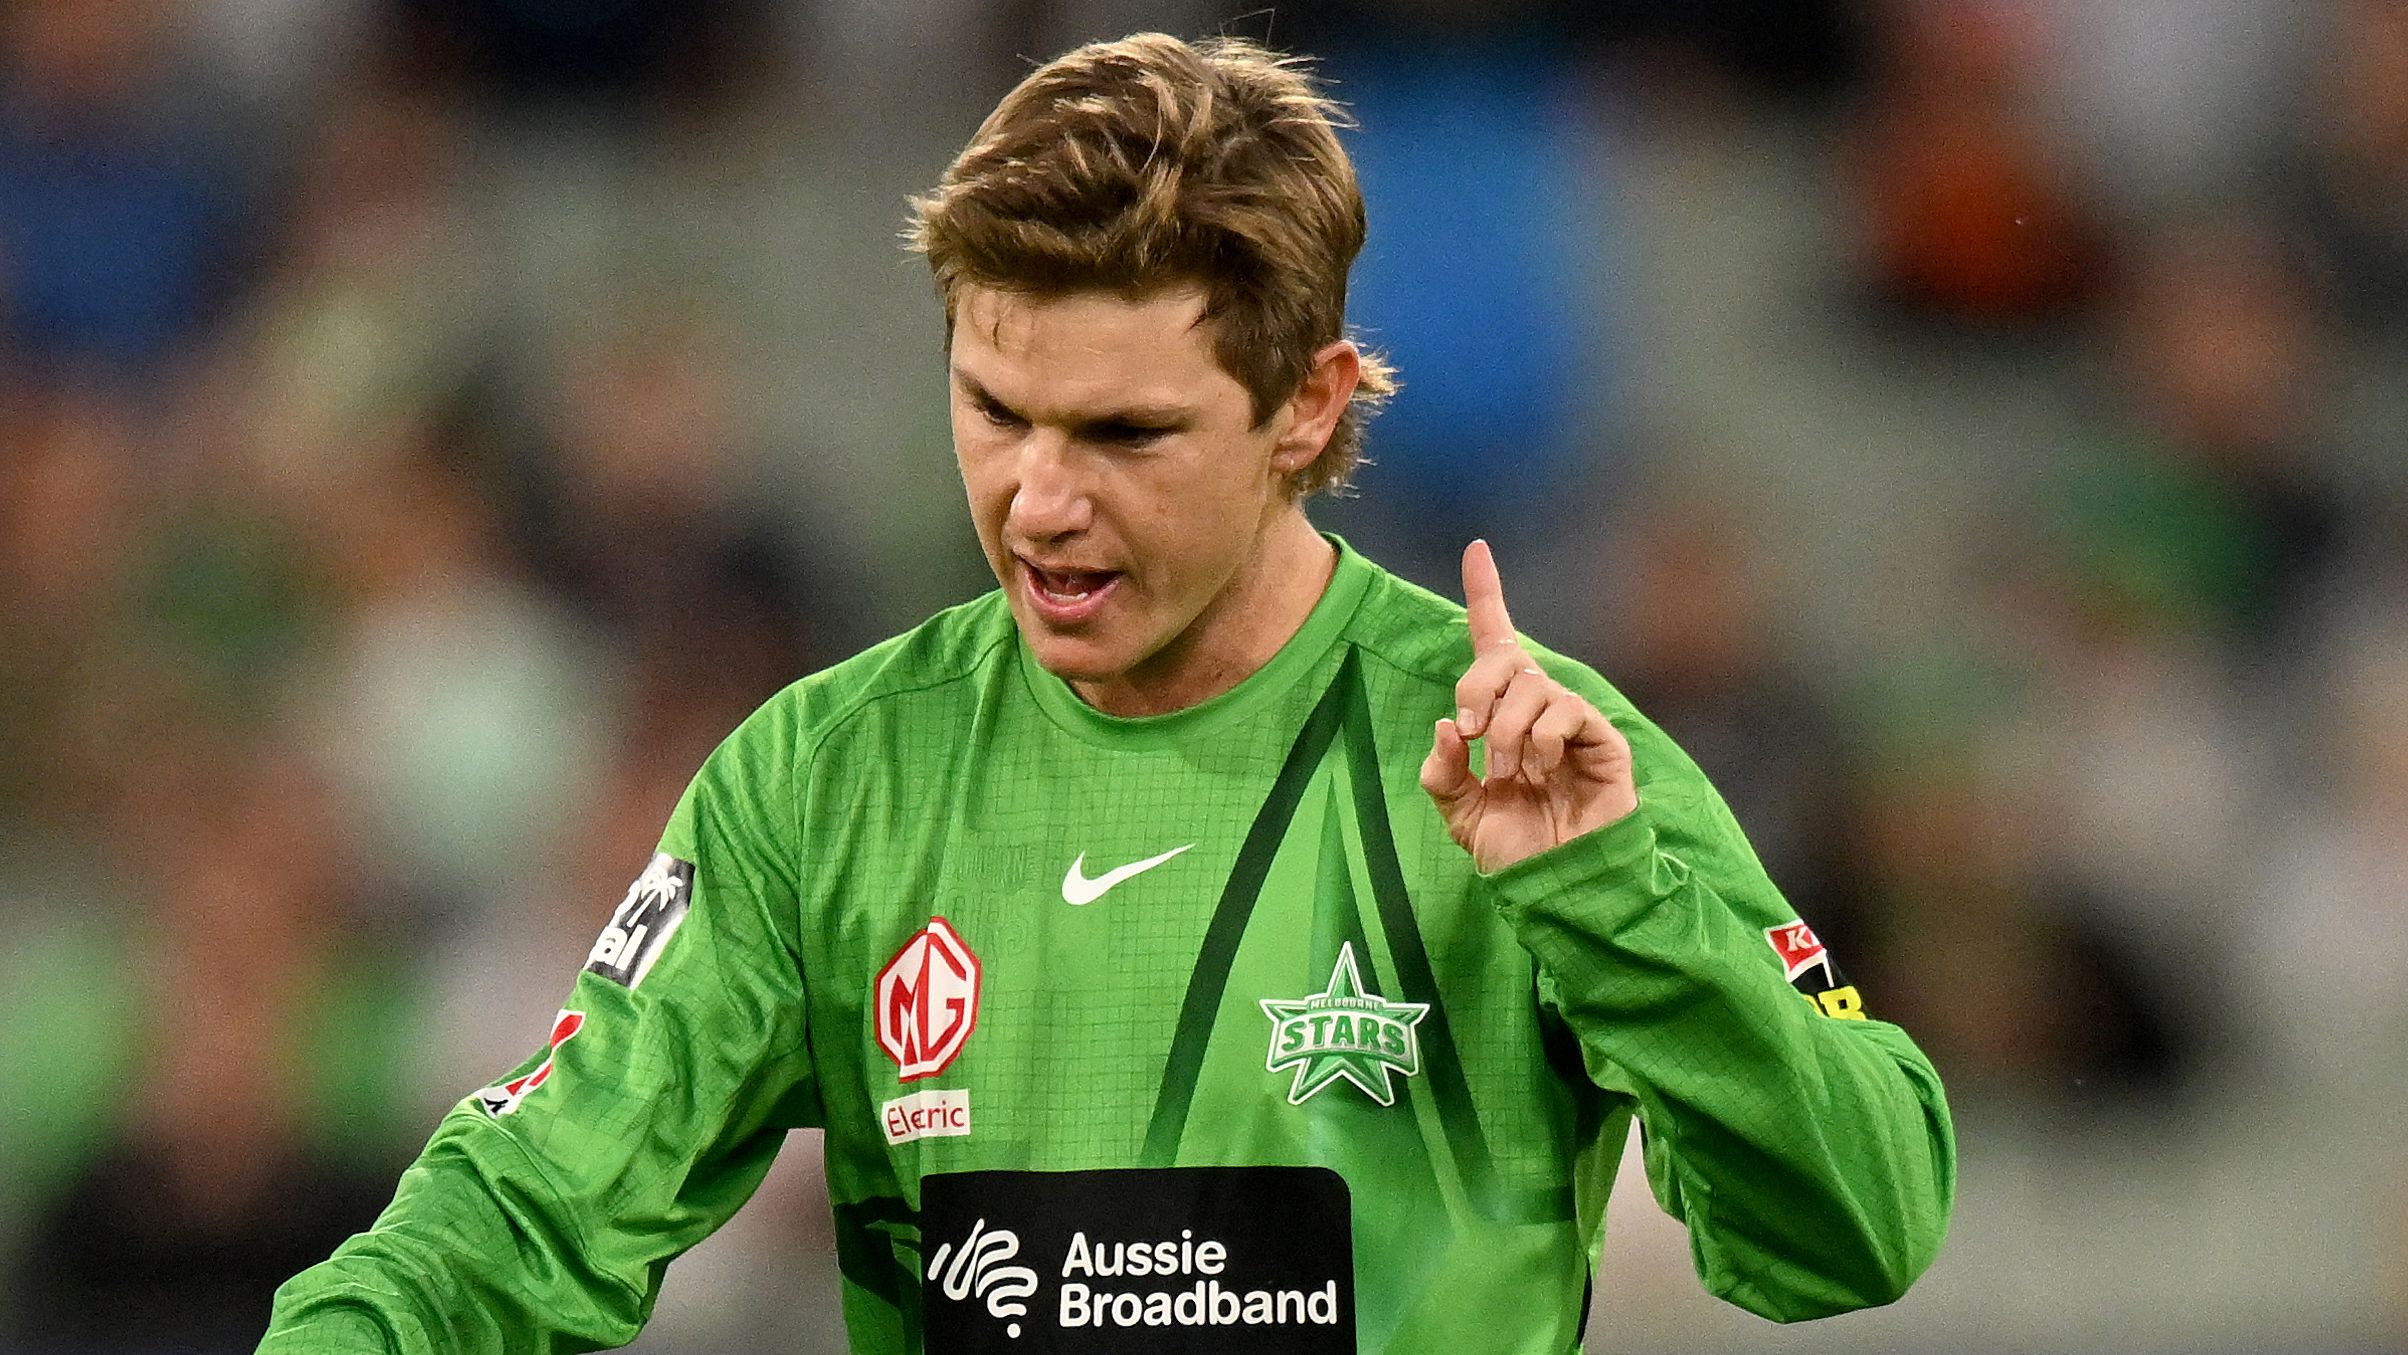 MELBOURNE, AUSTRALIA - JANUARY 03: Adam Zampa of the Stars reacts after attempting a mankad dismissal on Tom Rogers of the Renegades during the Men&#x27;s Big Bash League match between the Melbourne Stars and the Melbourne Renegades at Melbourne Cricket Ground, on January 03, 2023, in Melbourne, Australia. (Photo by Morgan Hancock/Getty Images)